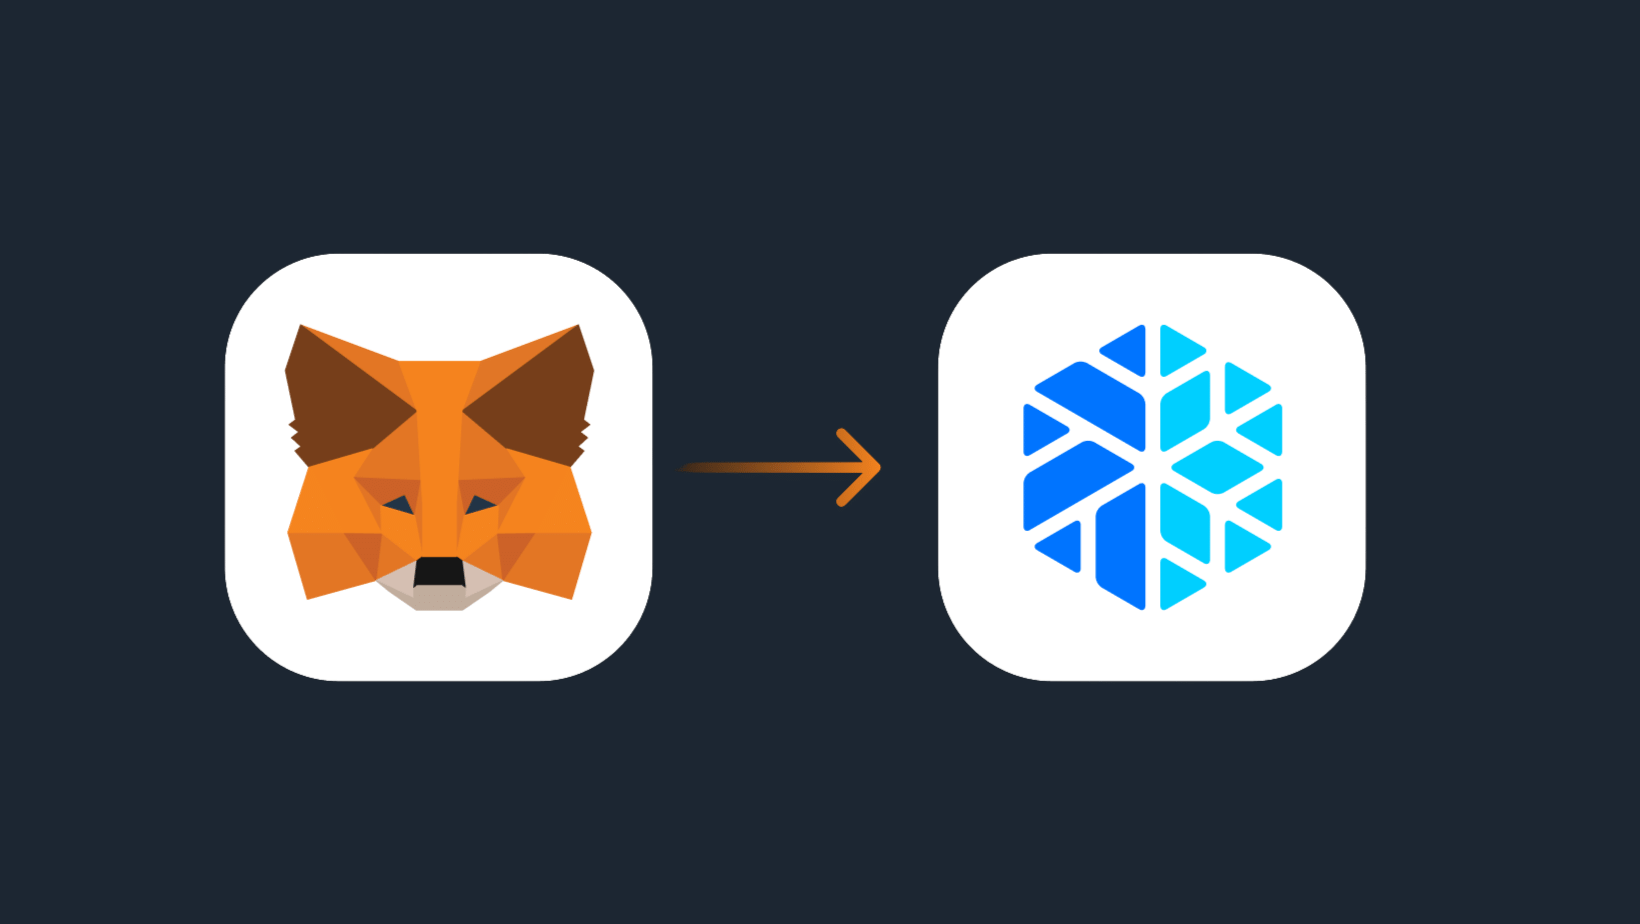 How to Set up a MetaMask Wallet